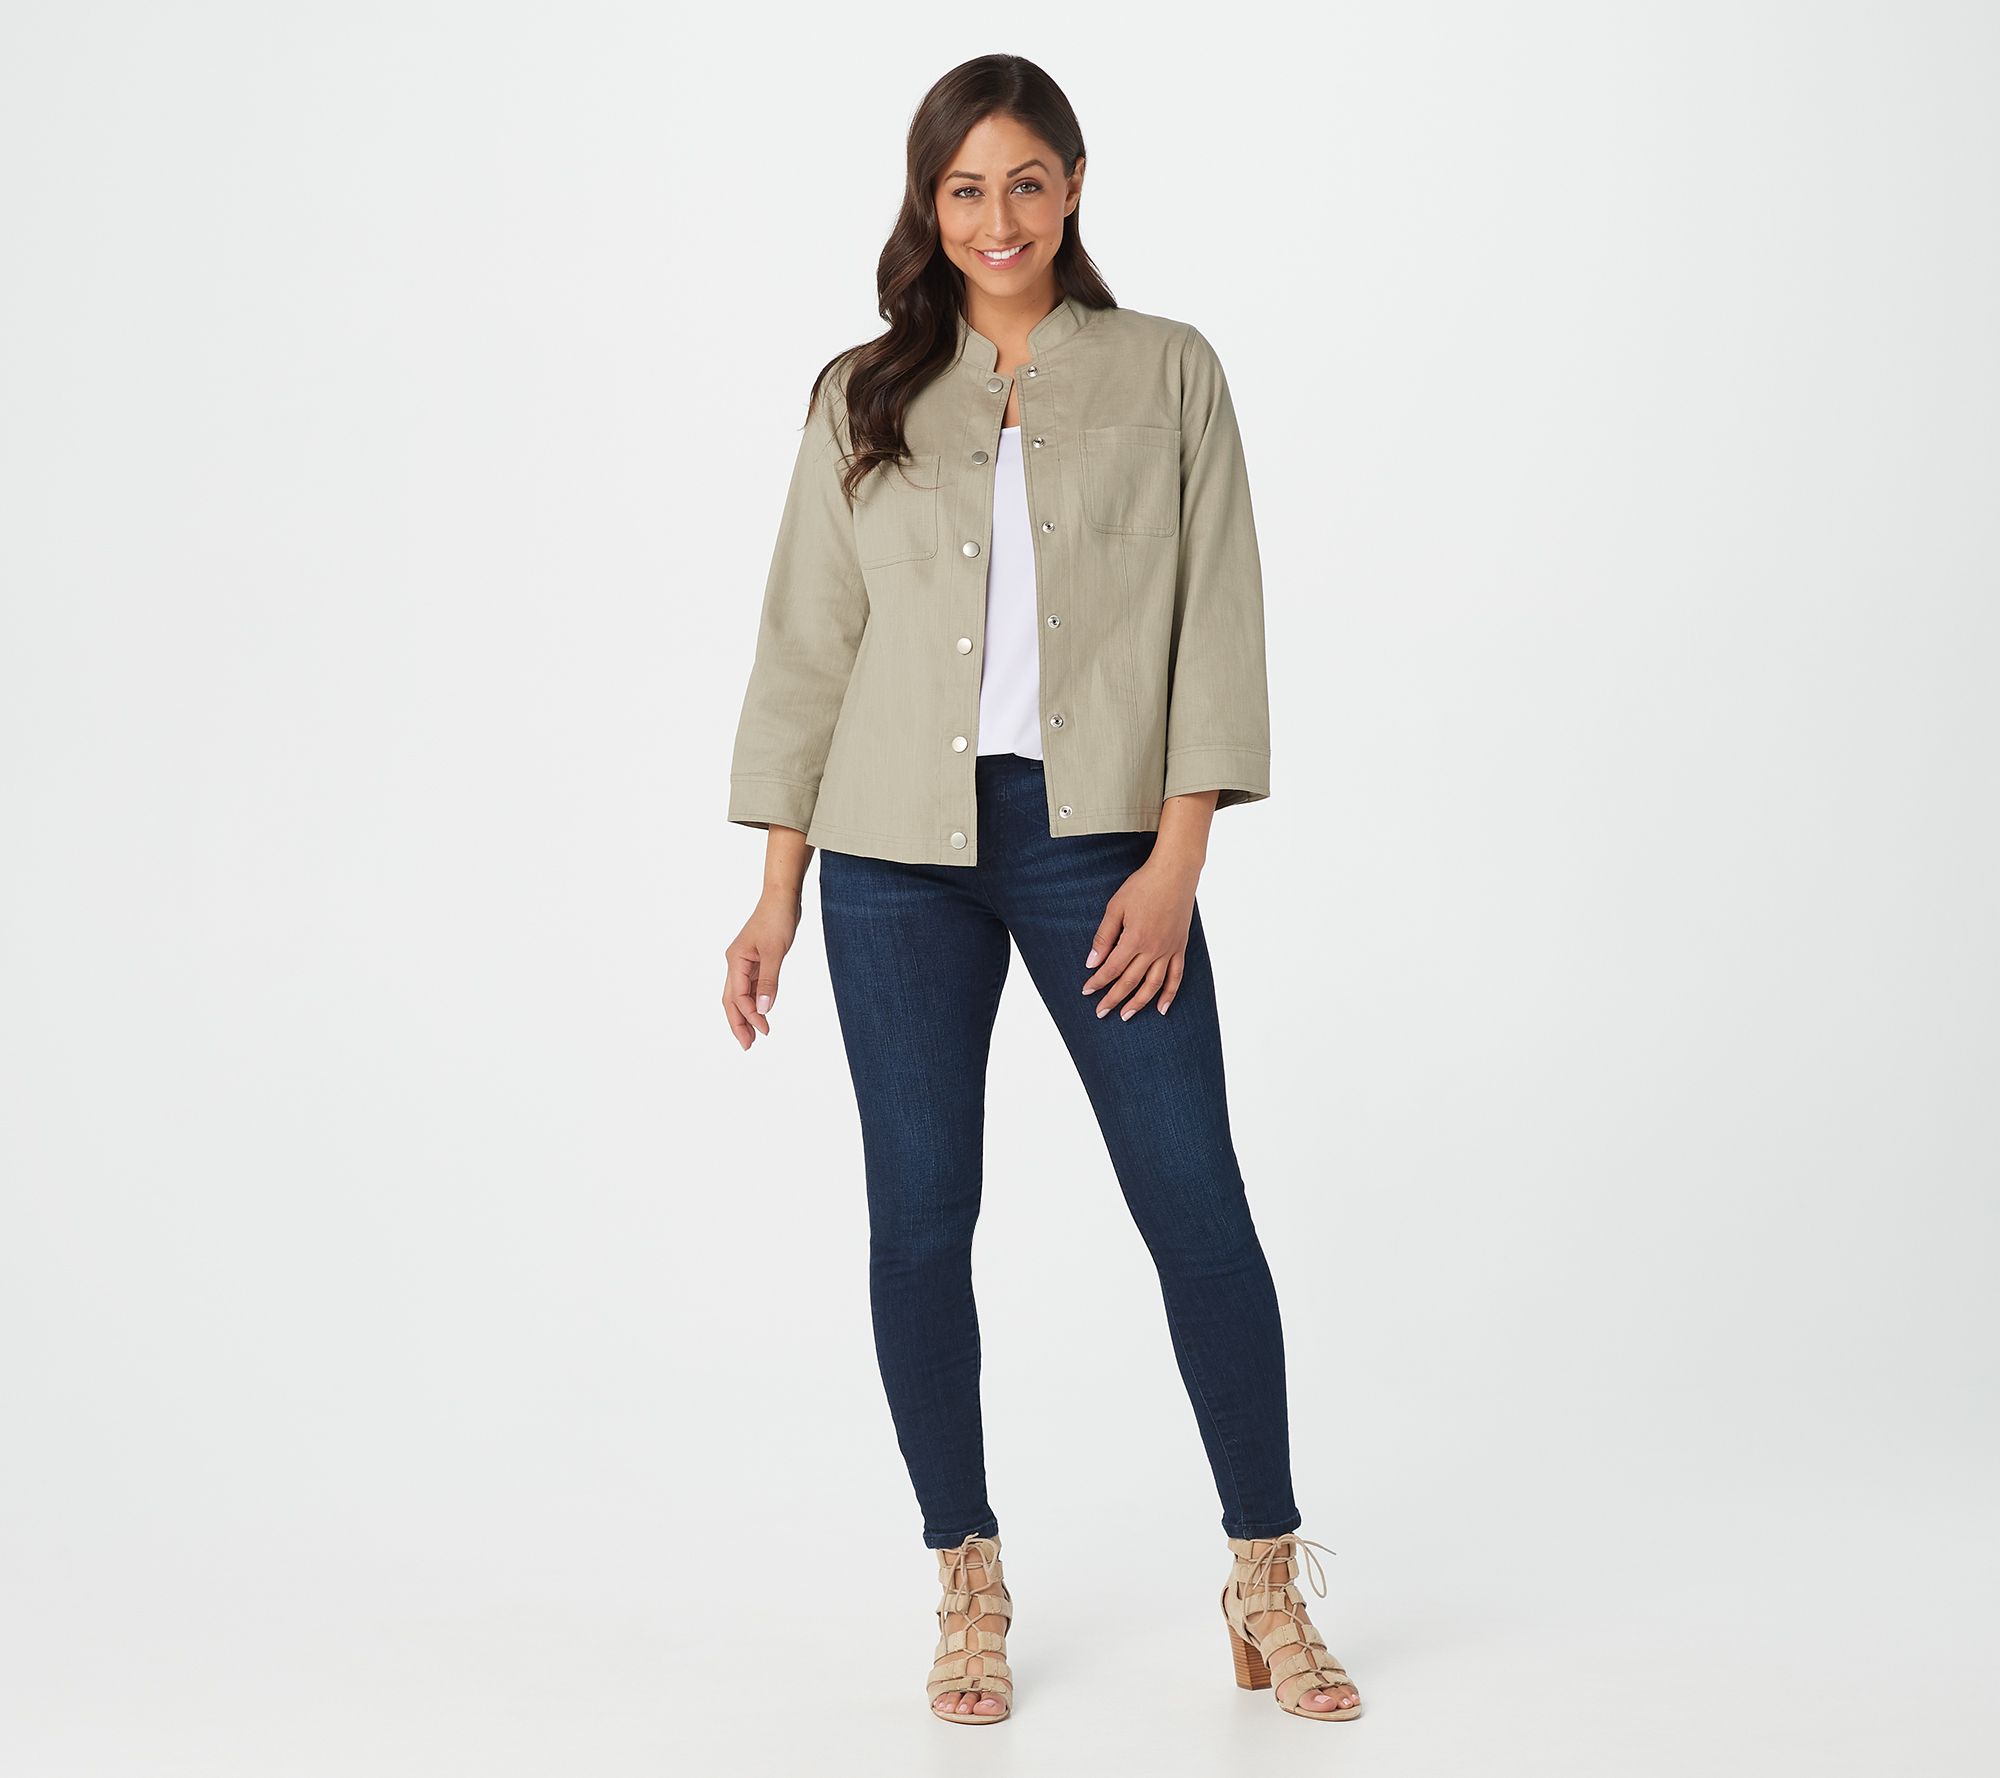 Belle by Kim Gravel Jacket with Printed Inside - QVC.com